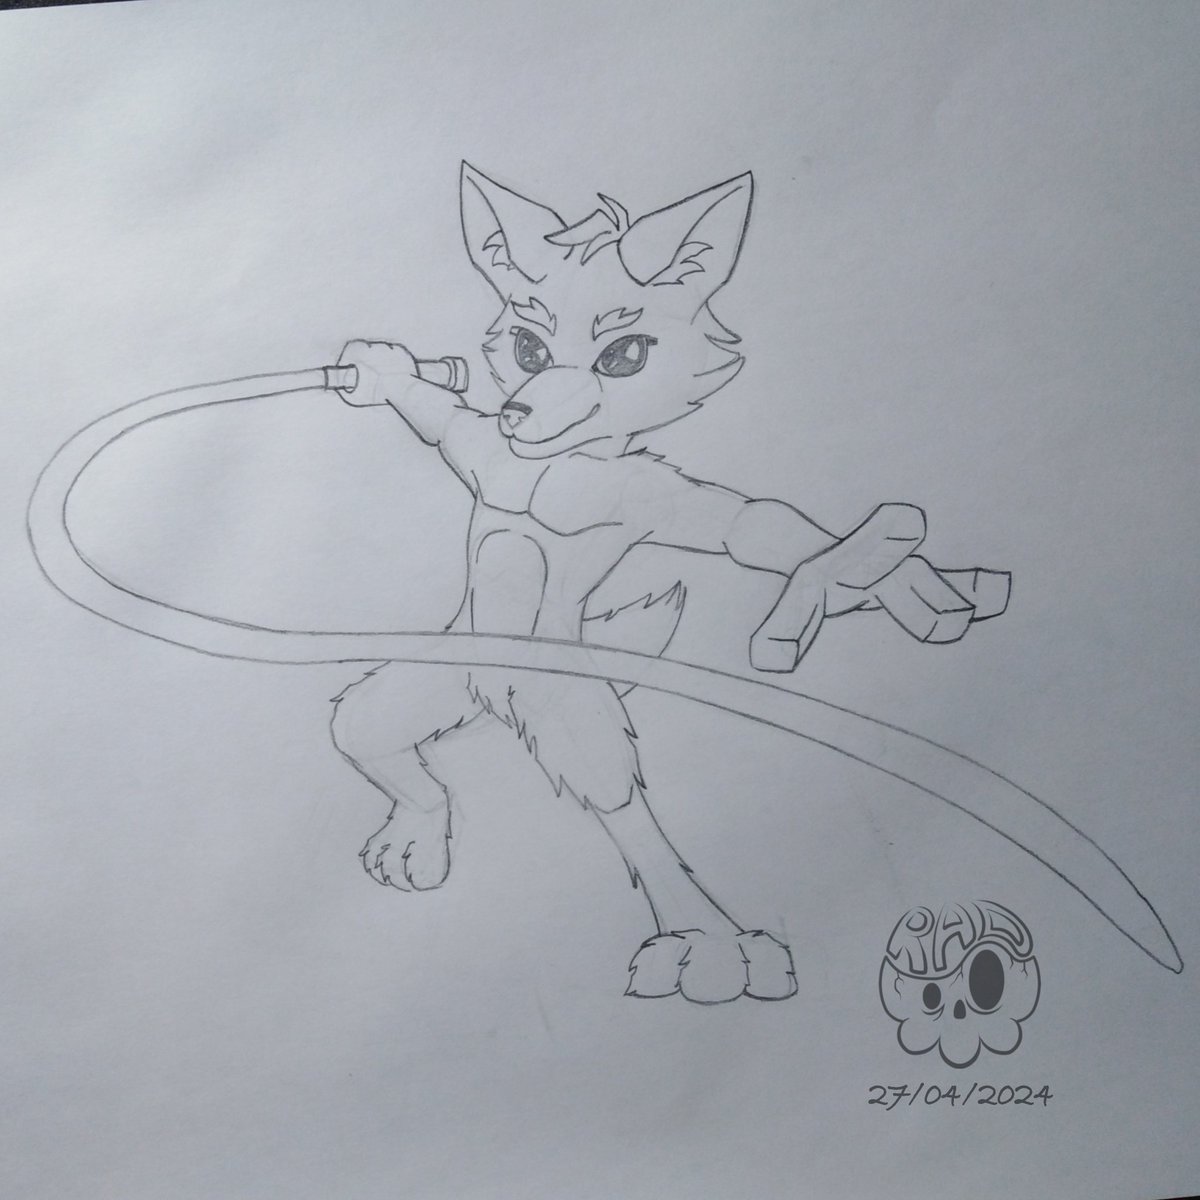 Didn't have any ideas for today's illustration so I looked up some prompts and the first one was an animal trainer. So, here's an animal trainer I guess😂

#art #drawing #illustration #pencildrawing #pencil #traditionalart #cartoon #furry #furryart #furries #fennecfox #animal